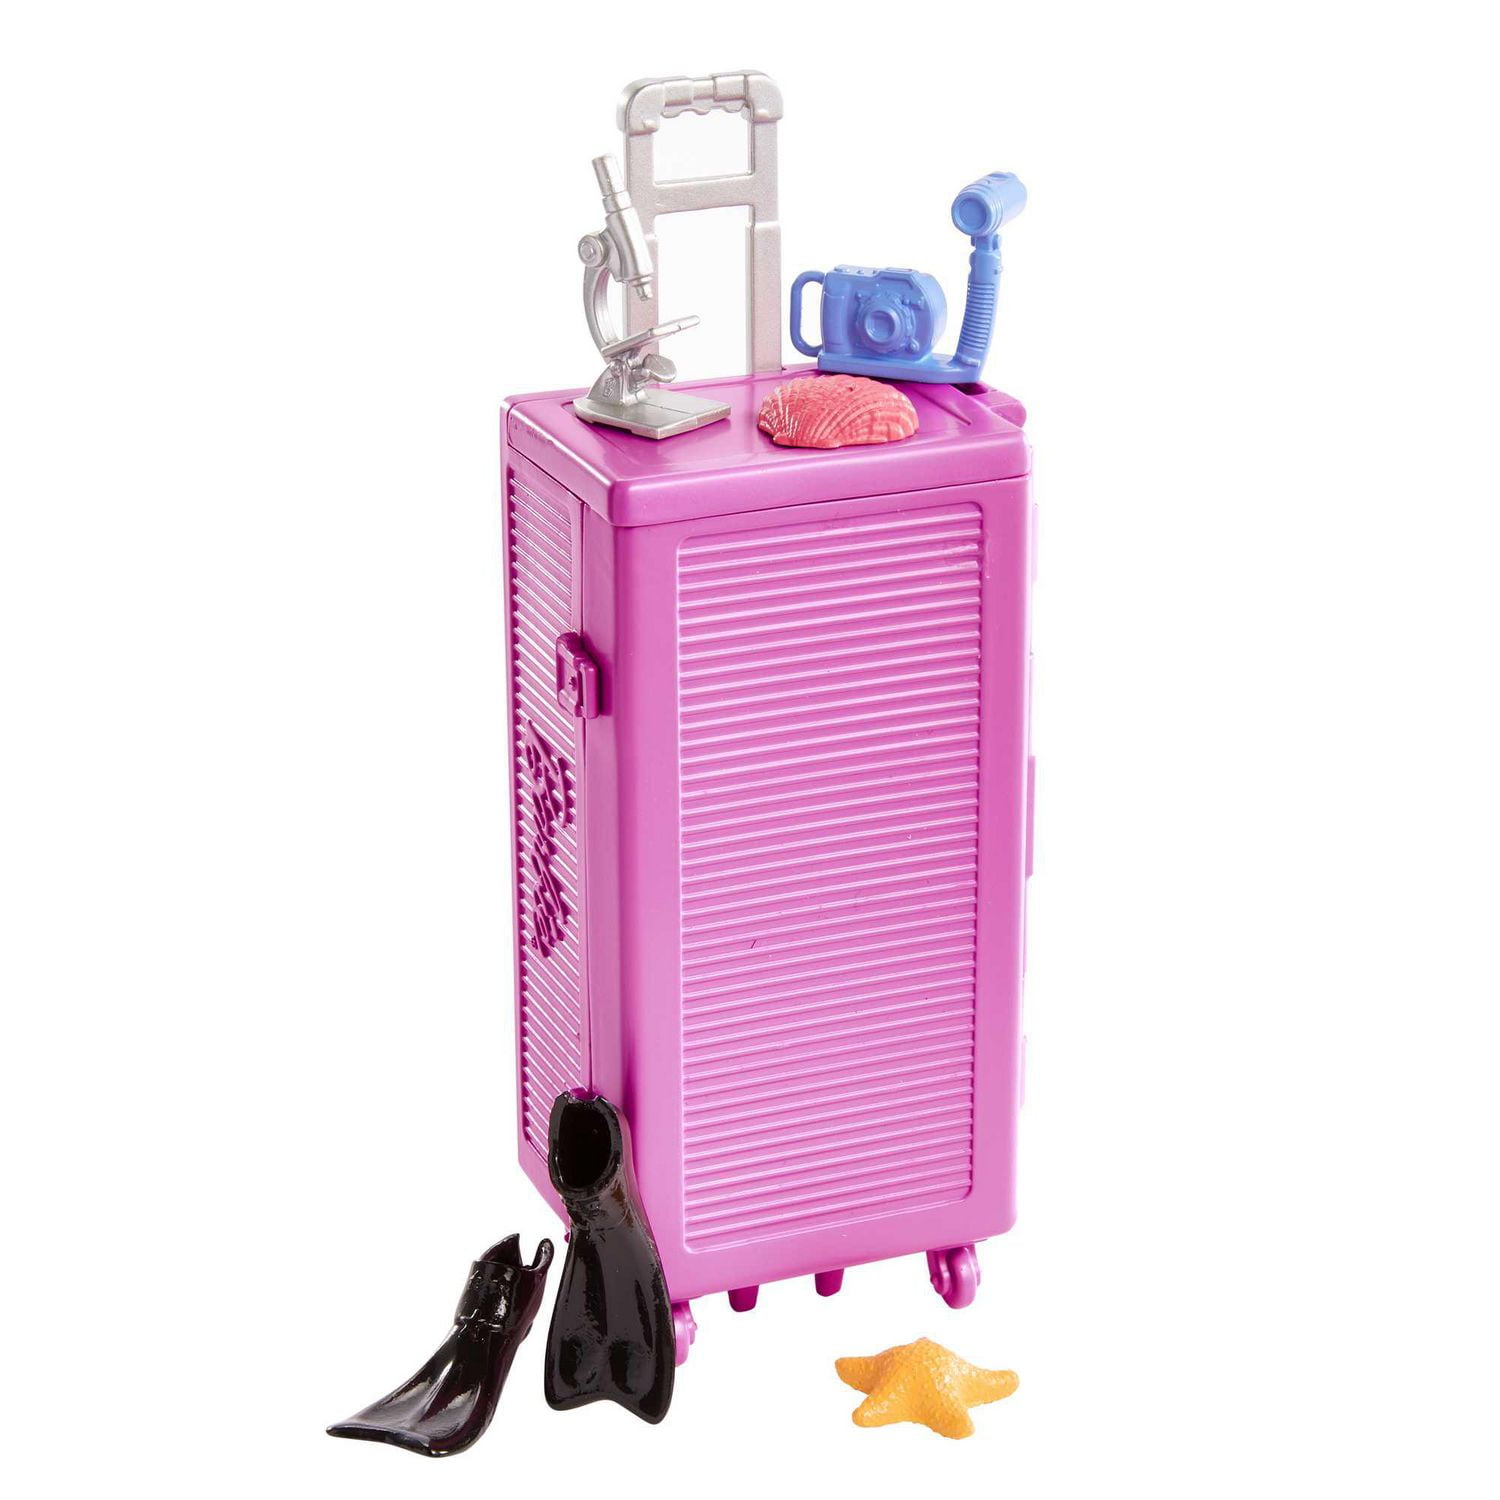 Barbie 8-Doll Multi-Compartment Storage Case with New and Improved